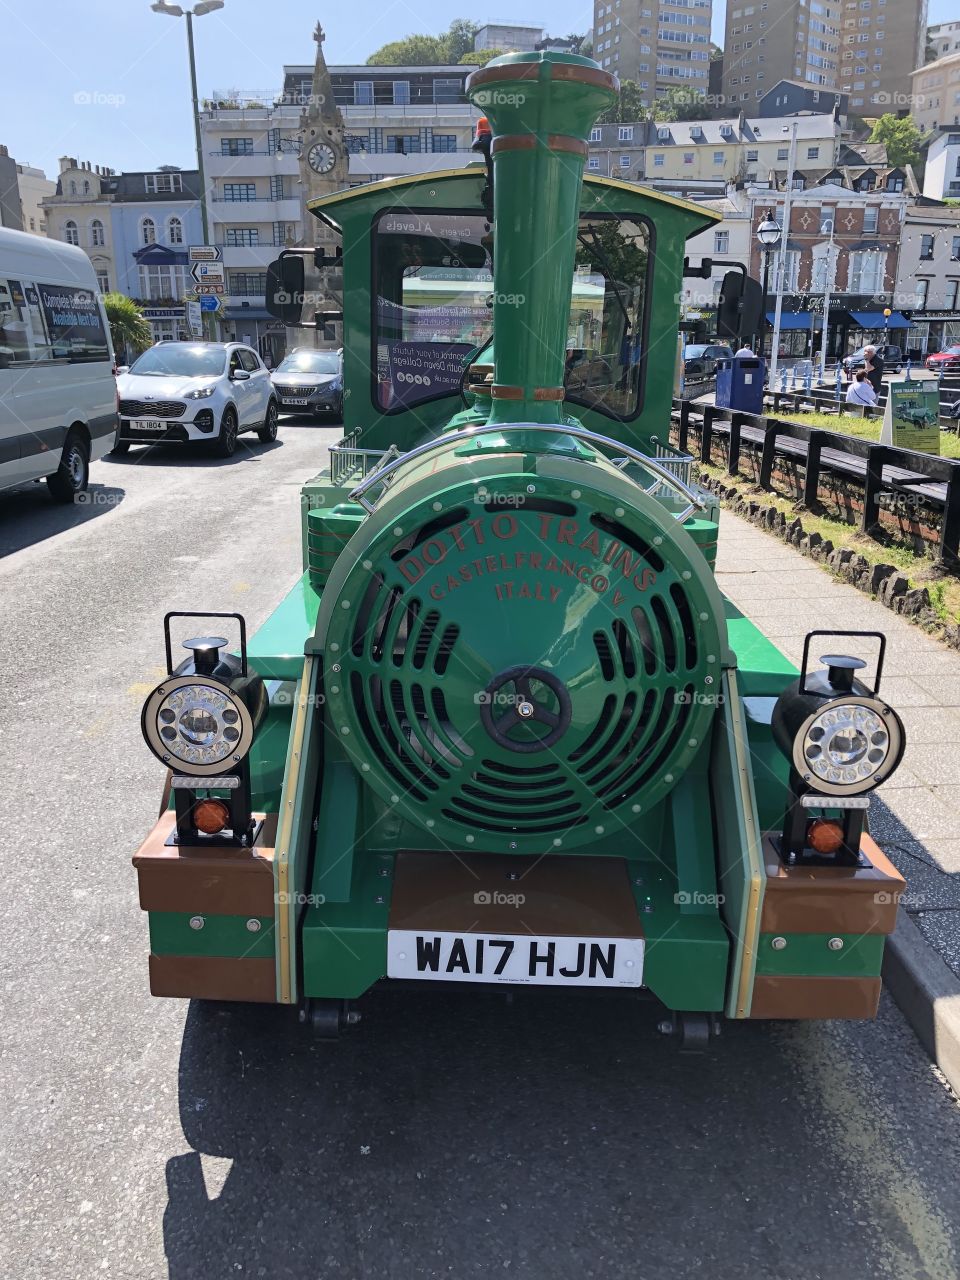 This super bright green land train provides enjoyment for thousands here in Torbay.